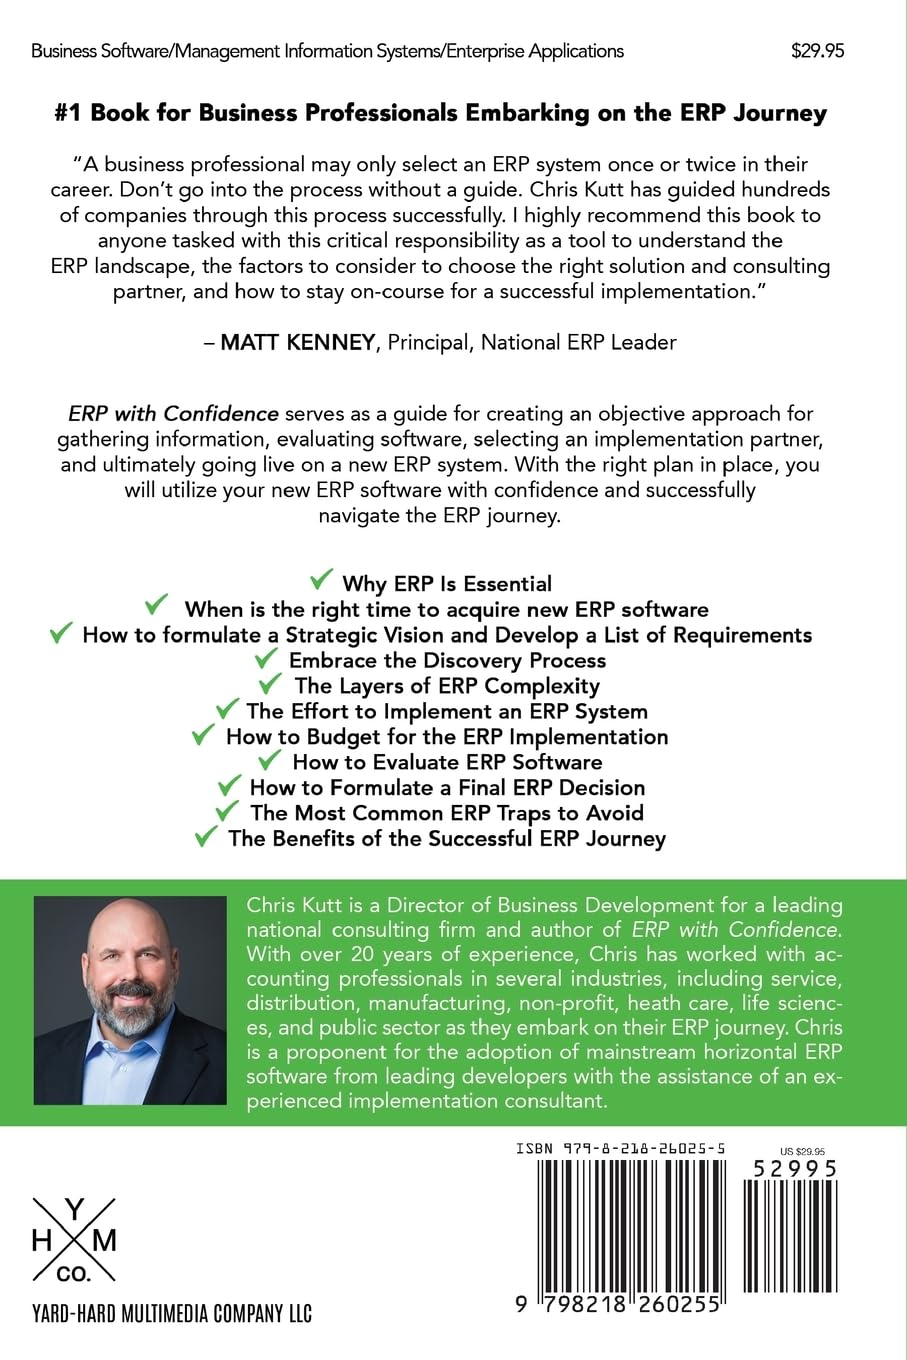 ERP with Confidence: The Ultimate Guide for Middle Market Professionals Navigating the ERP Journey